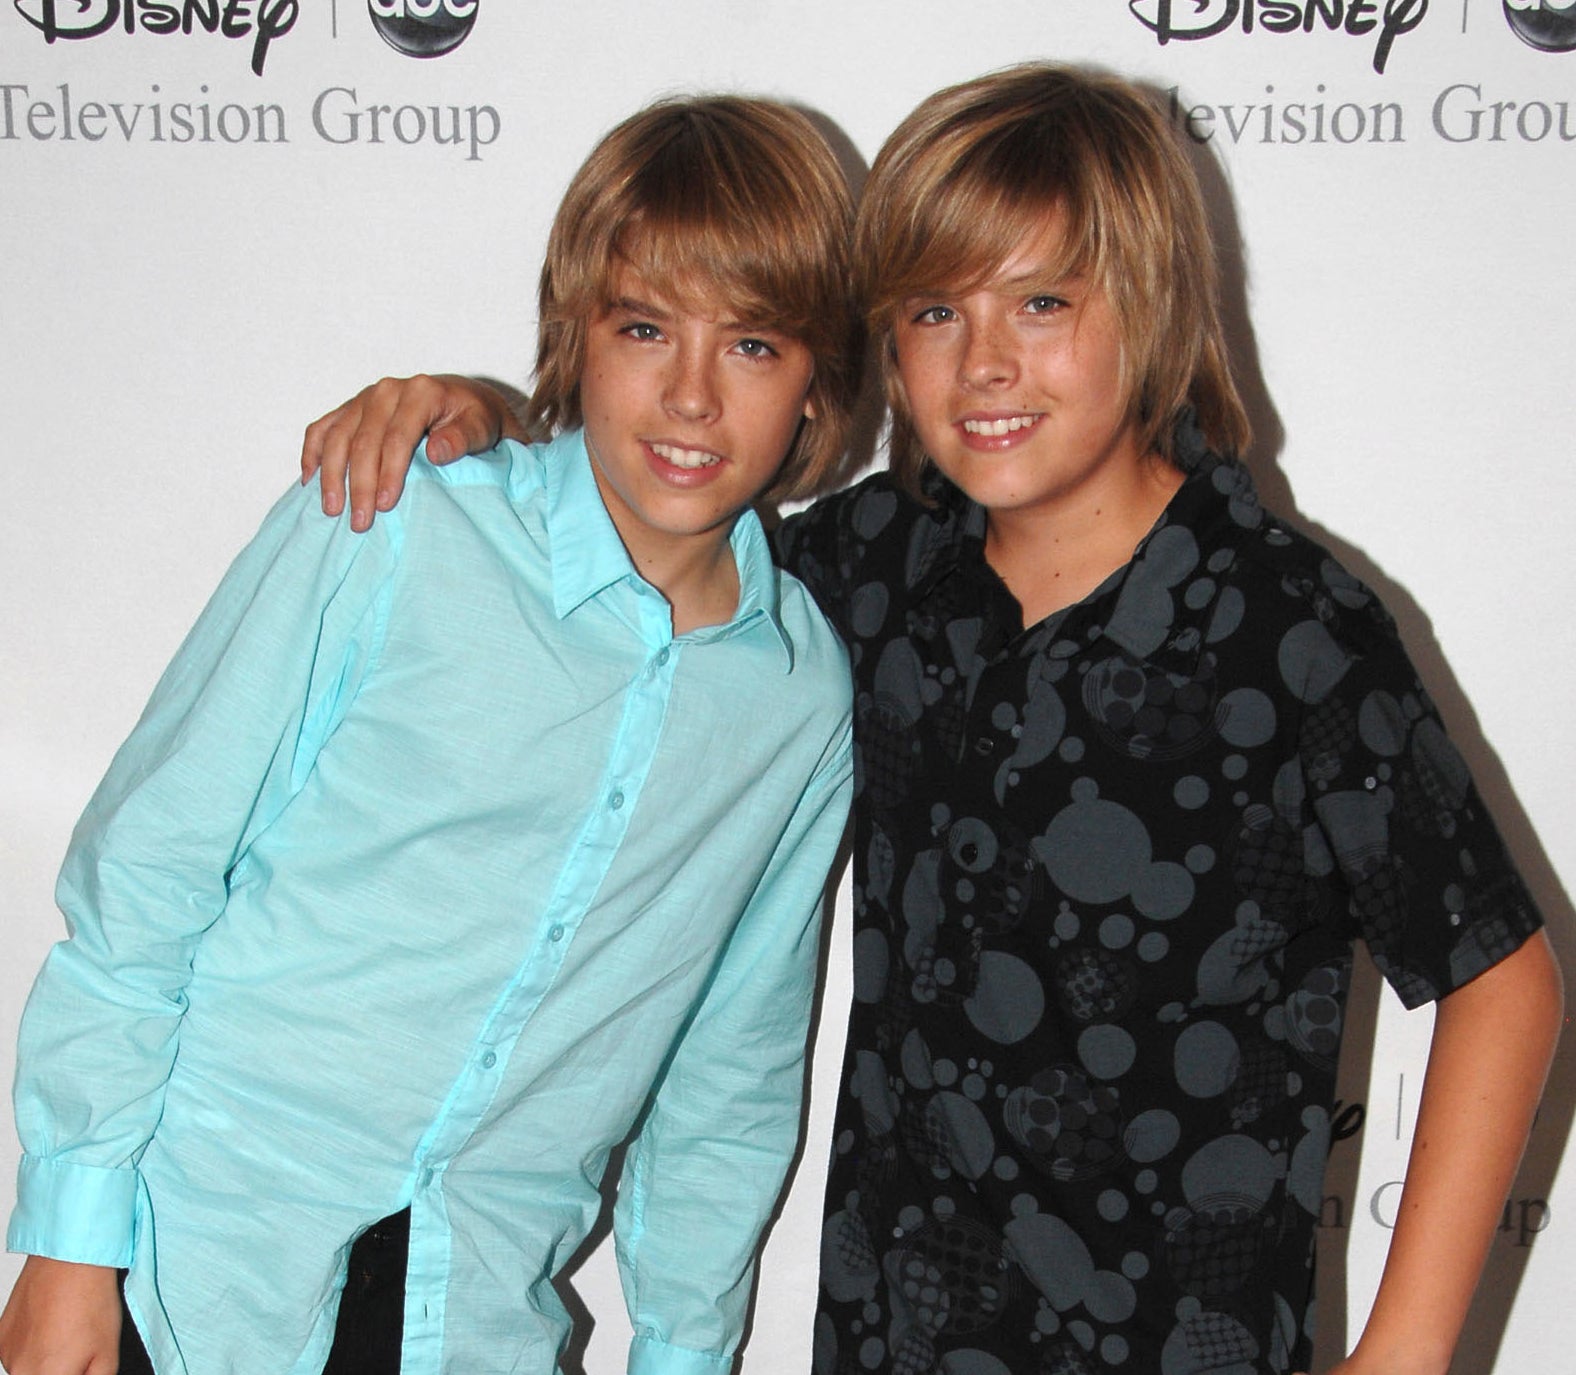 Close-up of Dylan and Cole as kids smiling at a media event